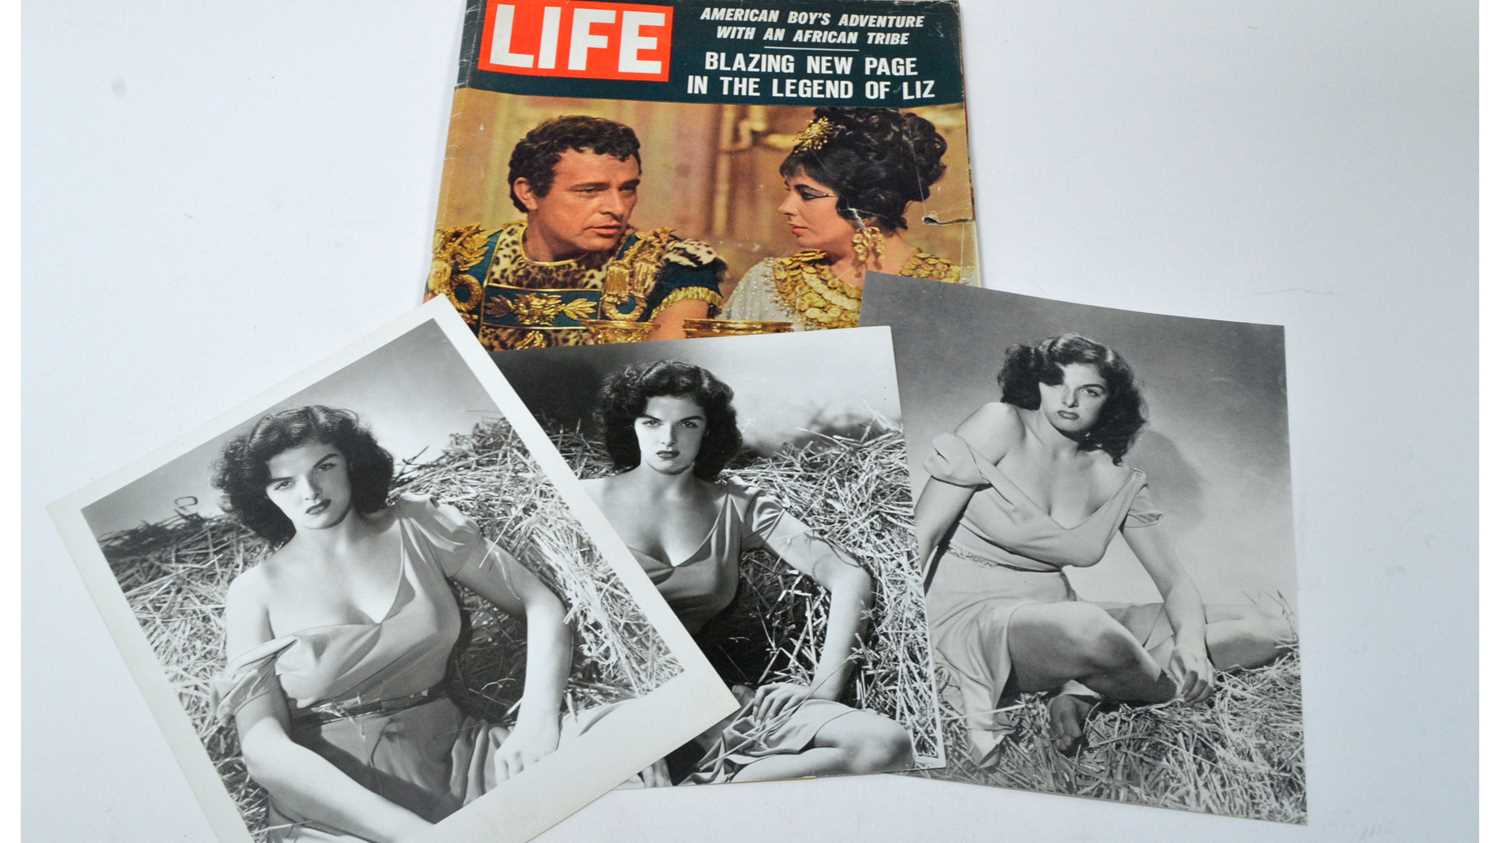 Lot 713 - Jane Russell photographs and Life magazine.